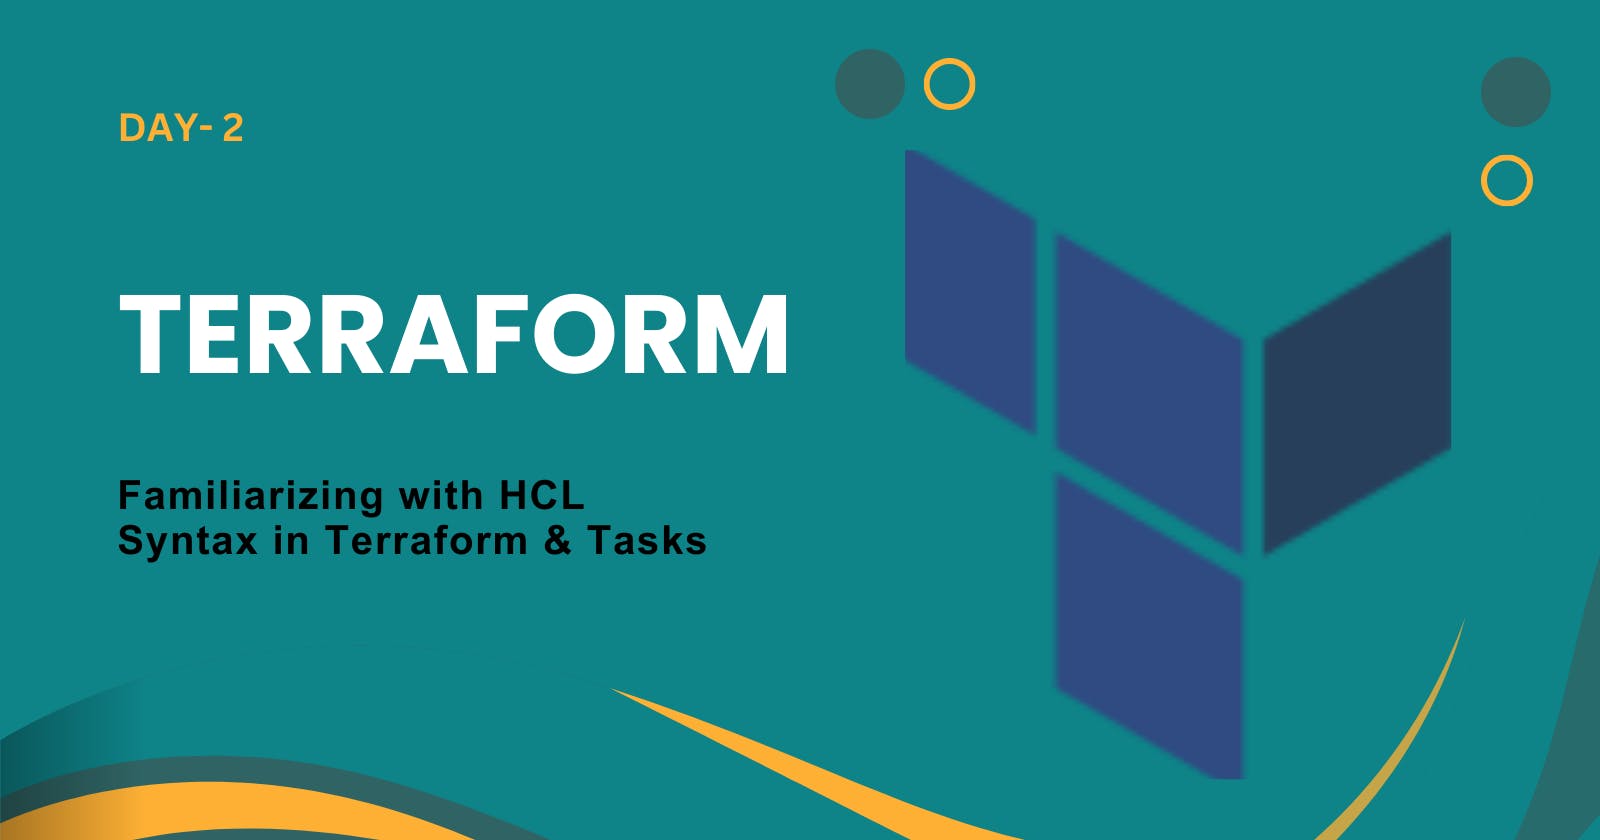 💠Familiarizing with HCL Syntax in Terraform & Tasks.